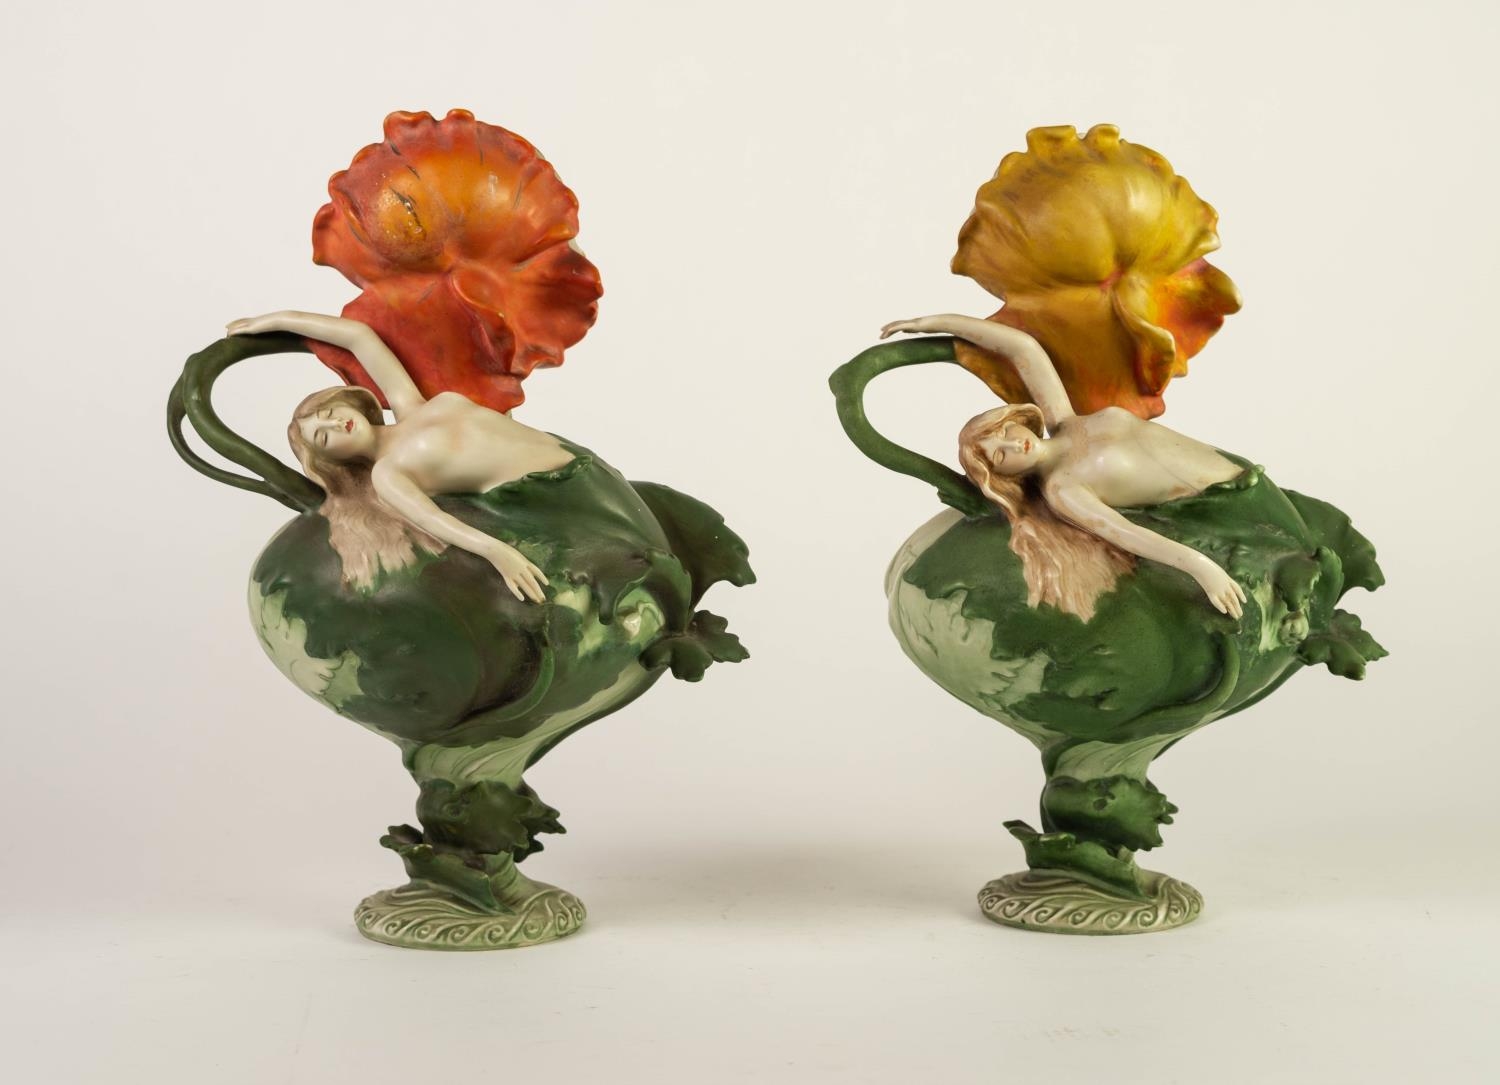 MATCHING PAIR OF ROYAL DUX STYLE FIGURAL PEDESTAL ORNAMENTS, each painted in muted tones and